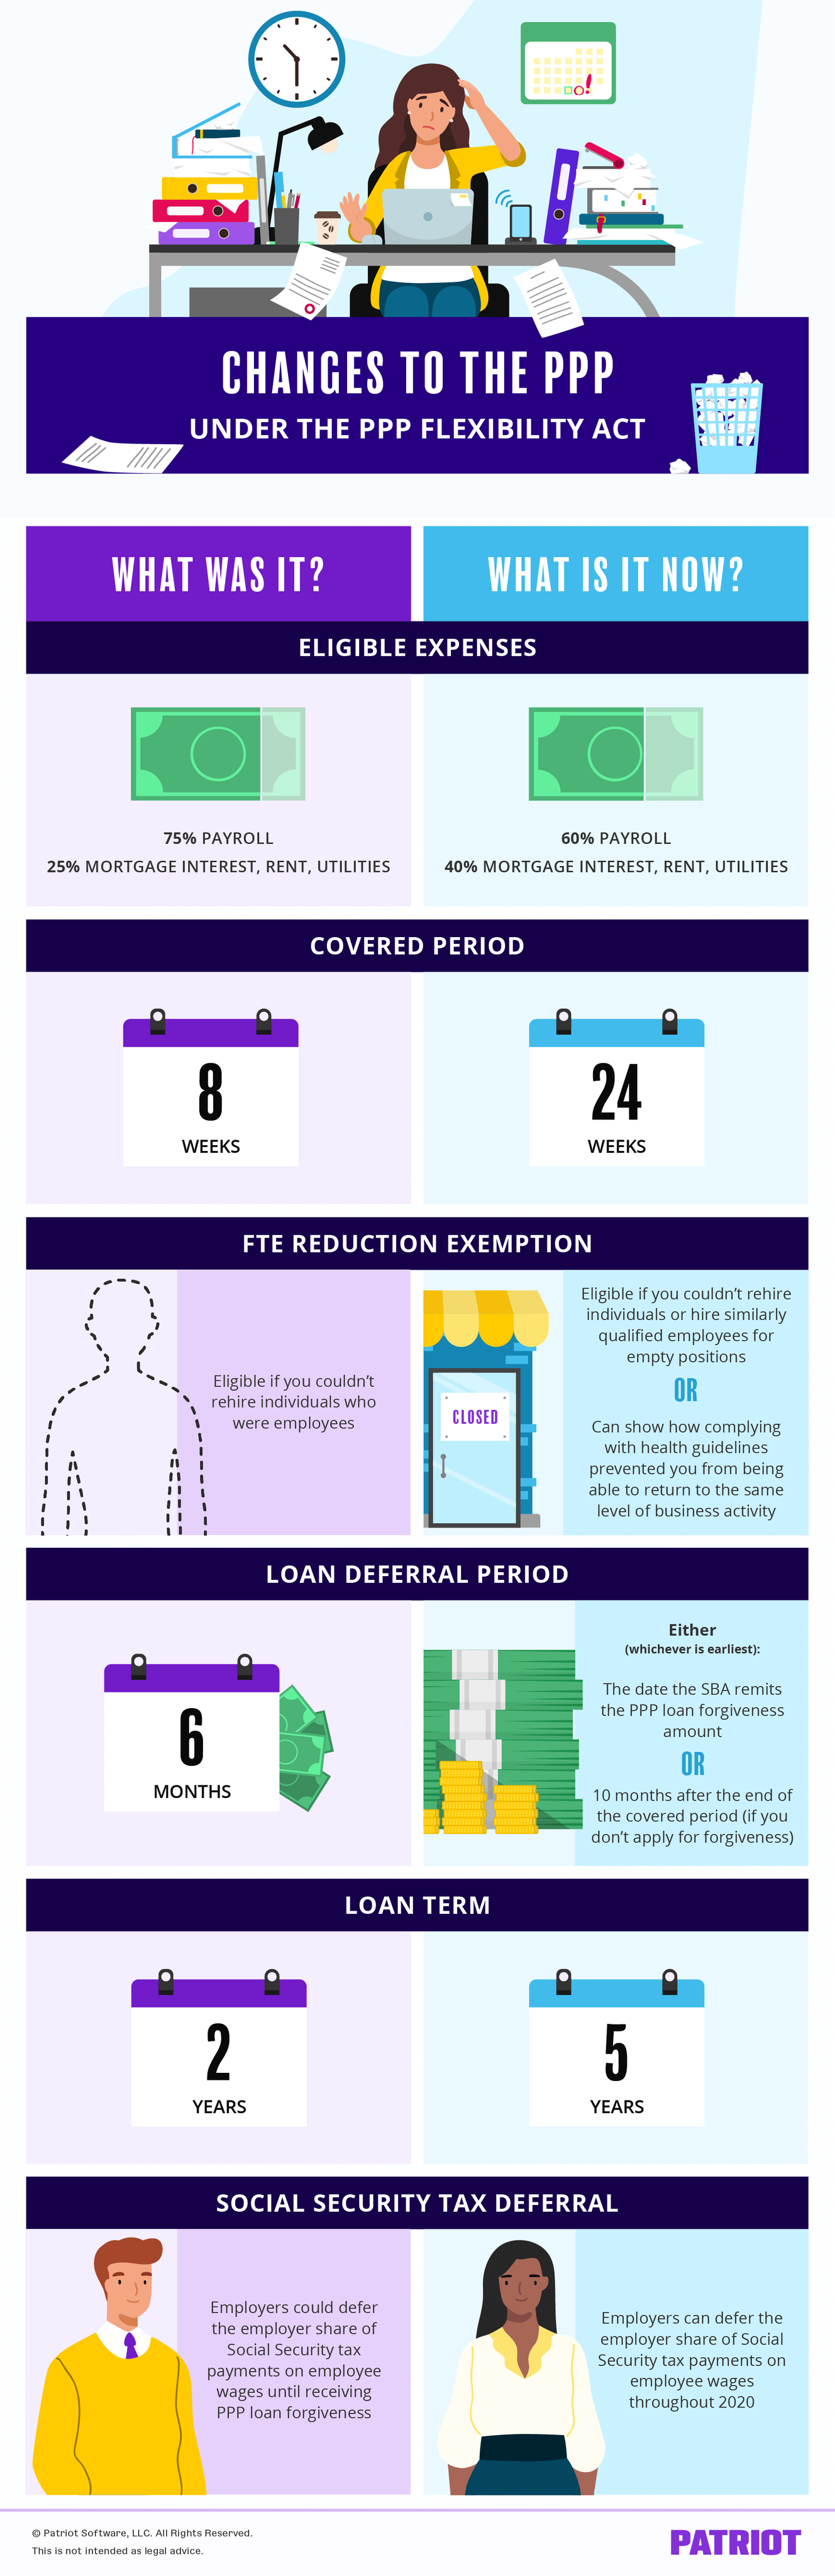 Paycheck Protection Program Flexibility Act infographic highlighting the six major changes to the PPP